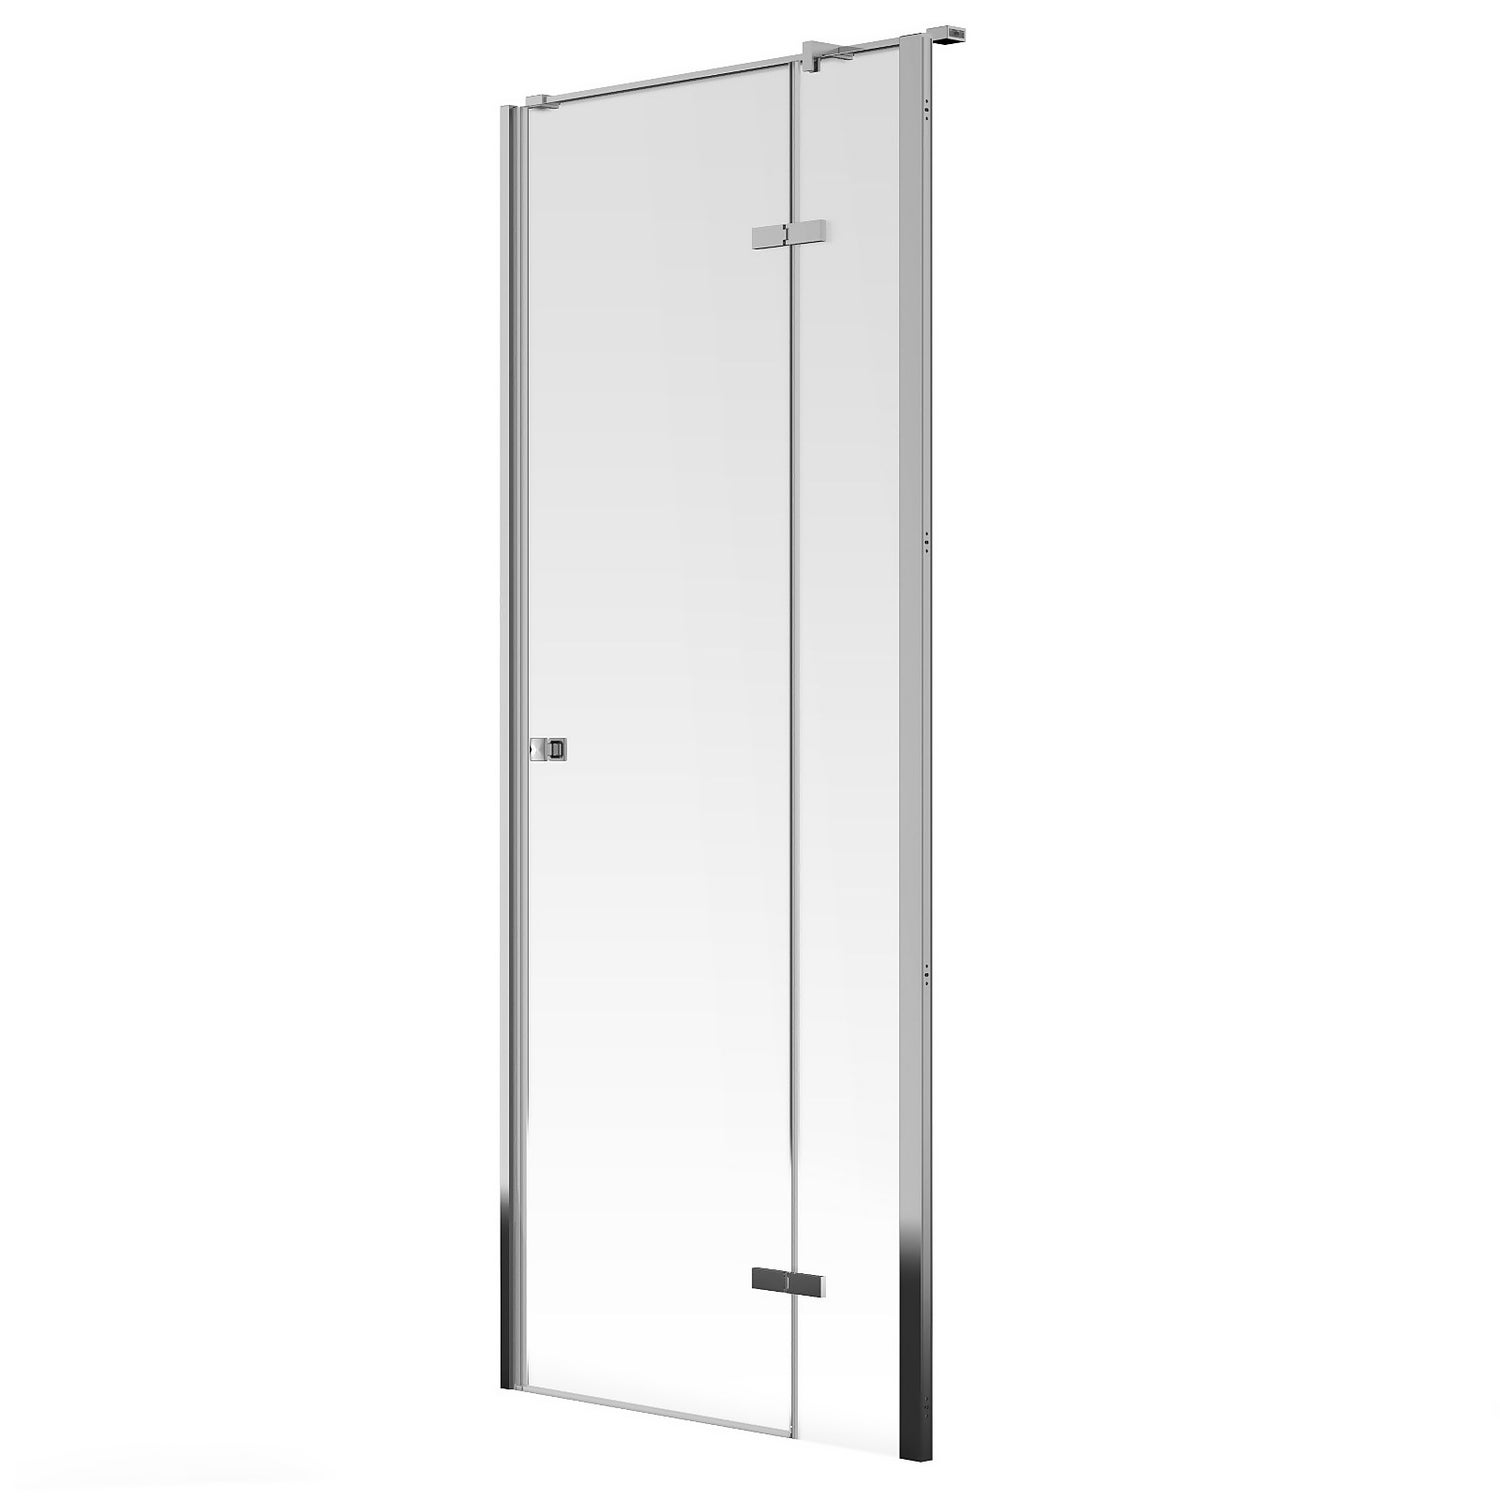 Pearl 800mm Hinged Shower Enclosure Door - Right Hand